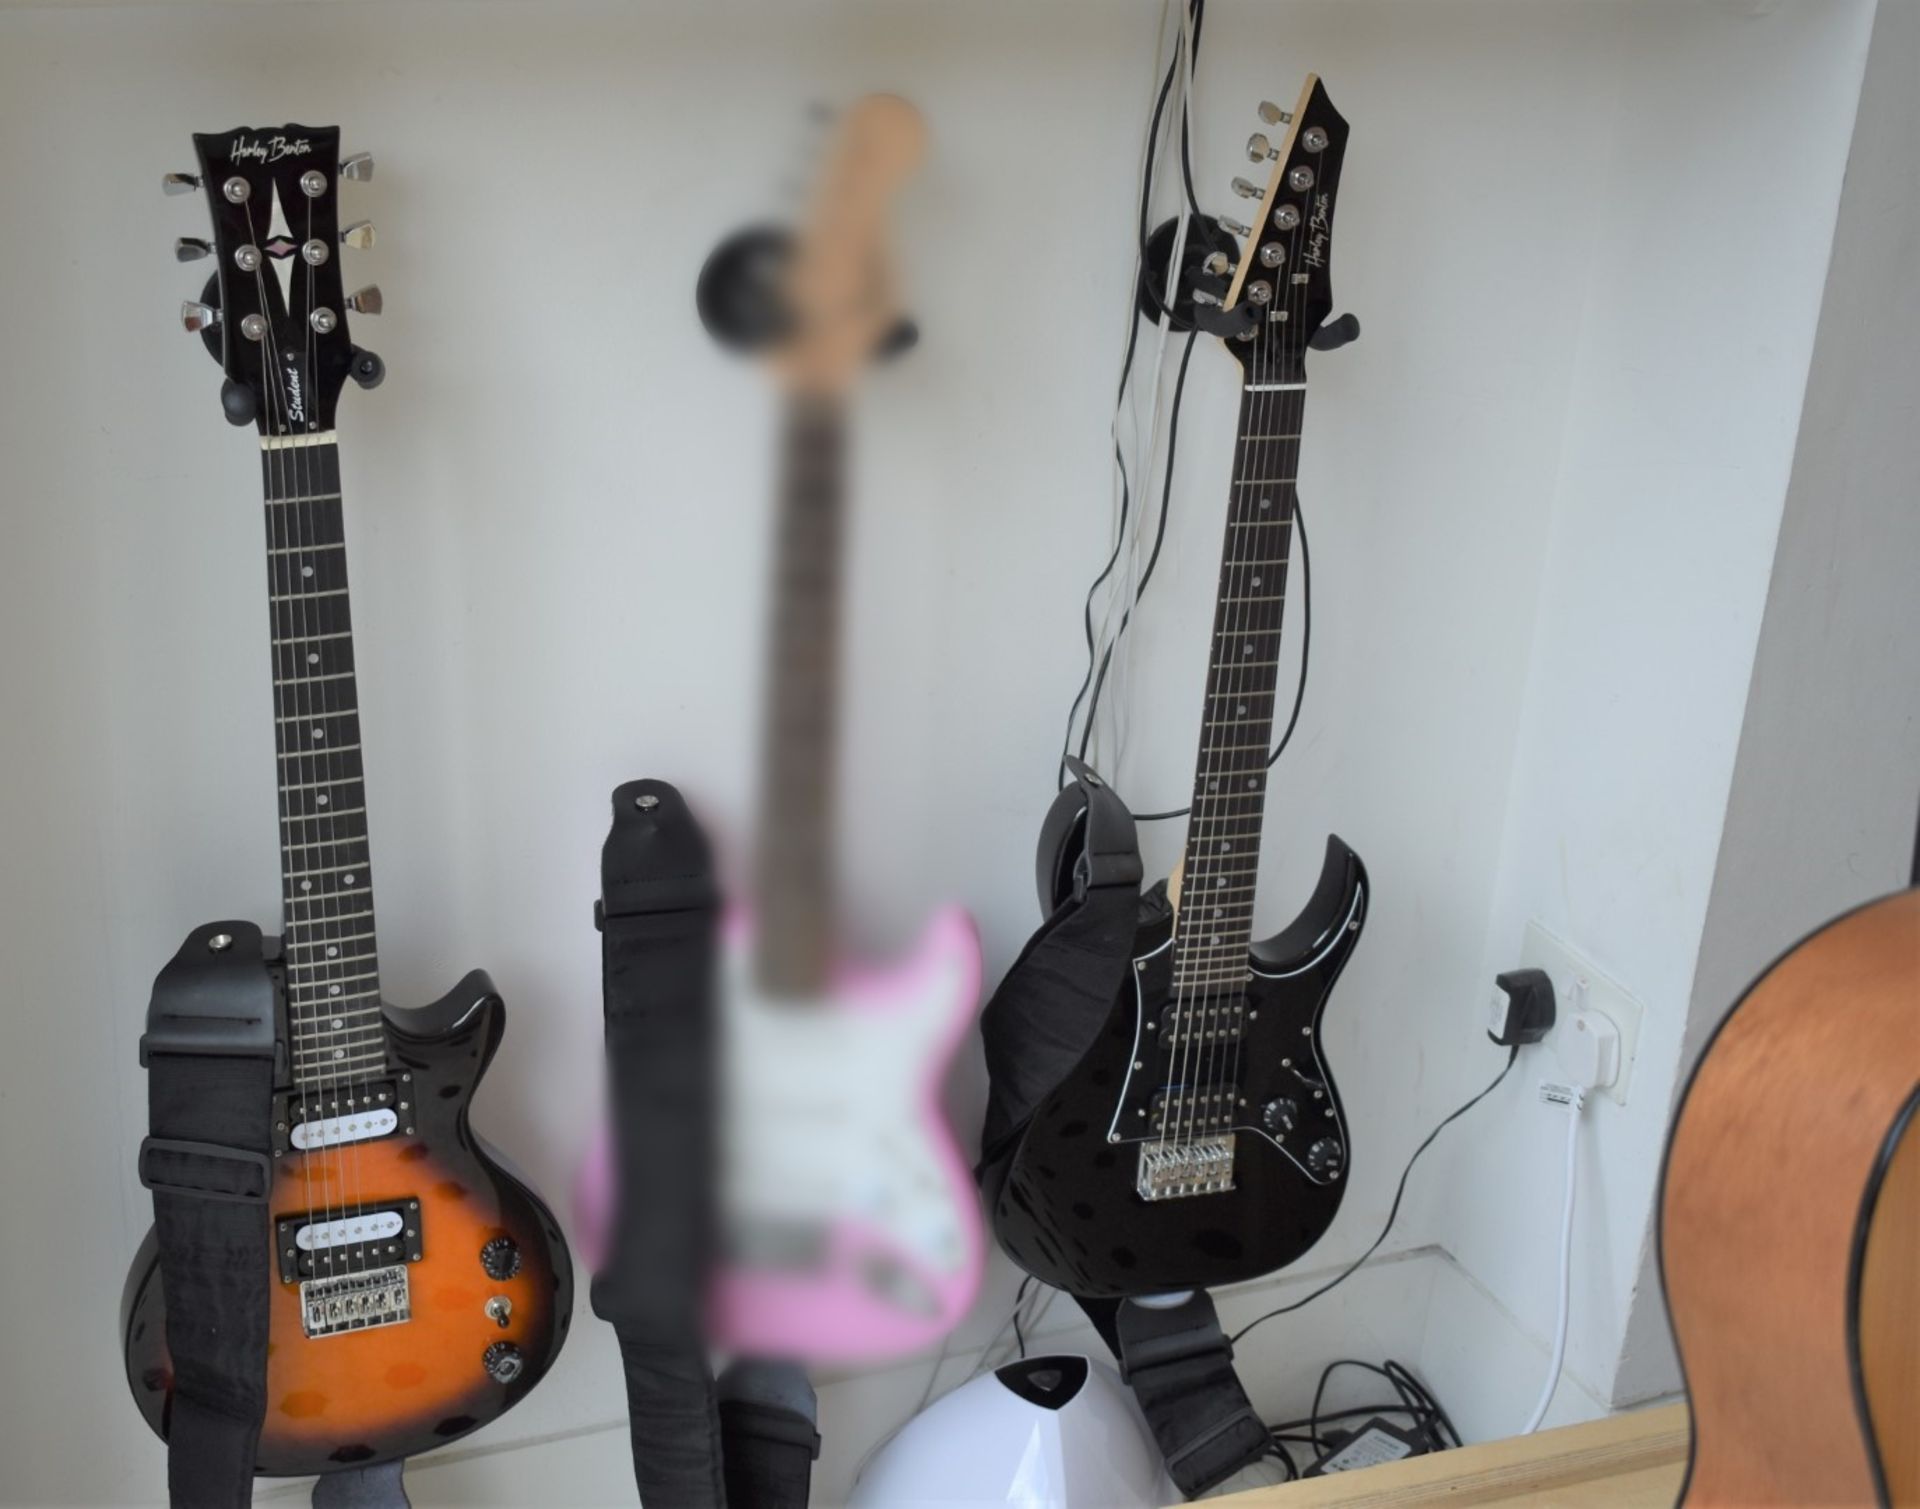 3 x Childrens Guitars to Include 2 x Electric Guitars and 1 x Classical Guitar - Ref KP101 - CL489 -